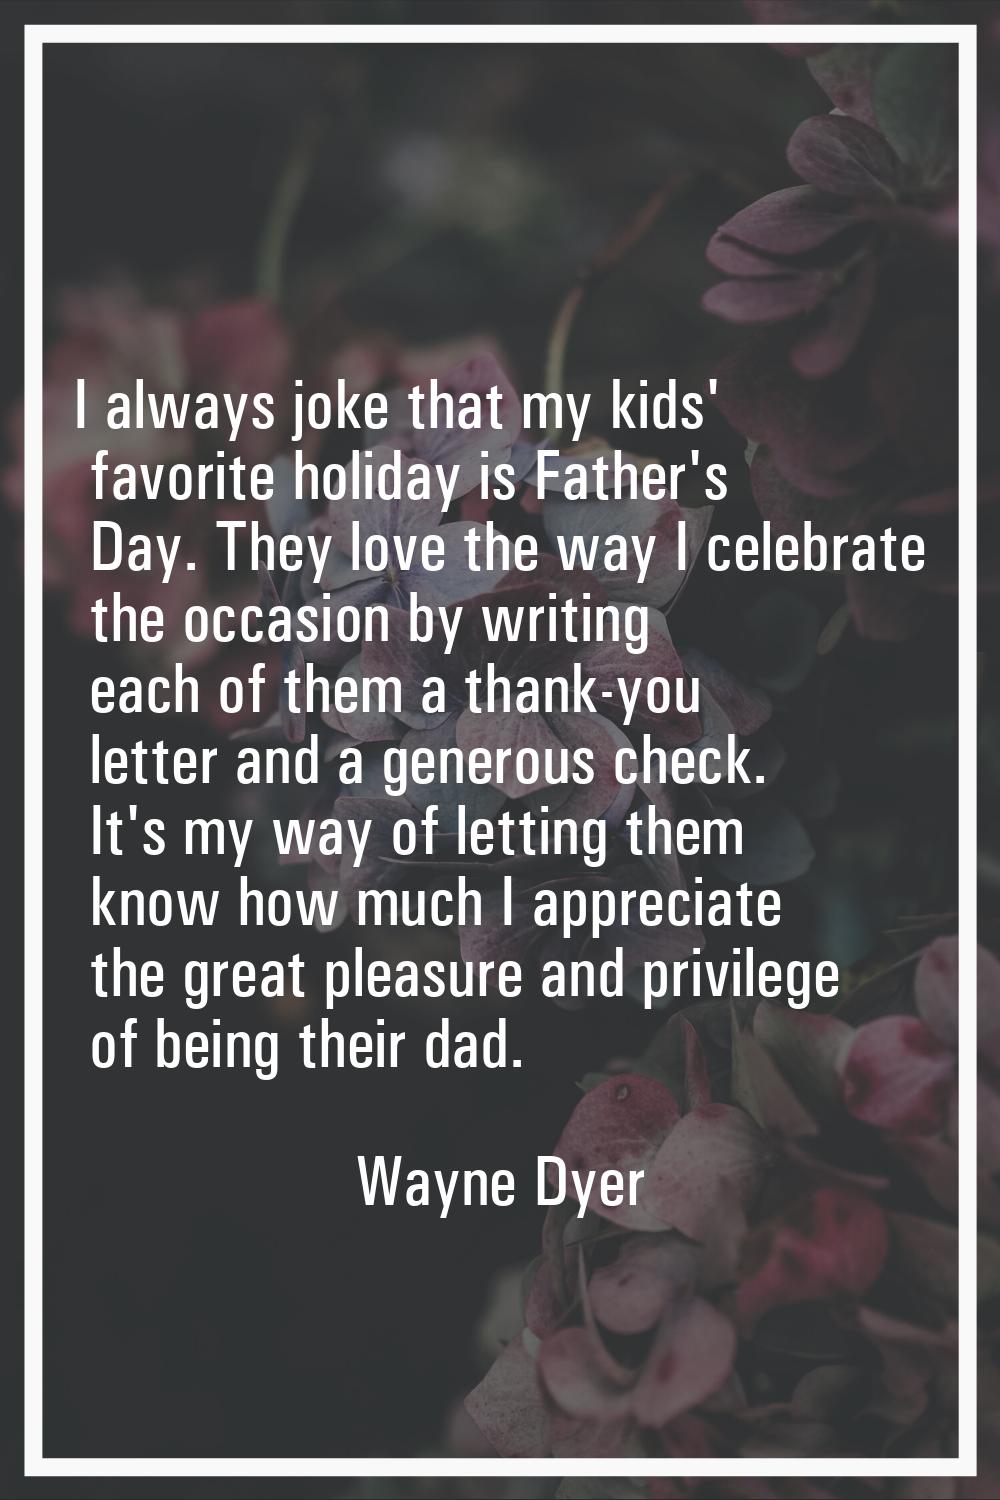 I always joke that my kids' favorite holiday is Father's Day. They love the way I celebrate the occ